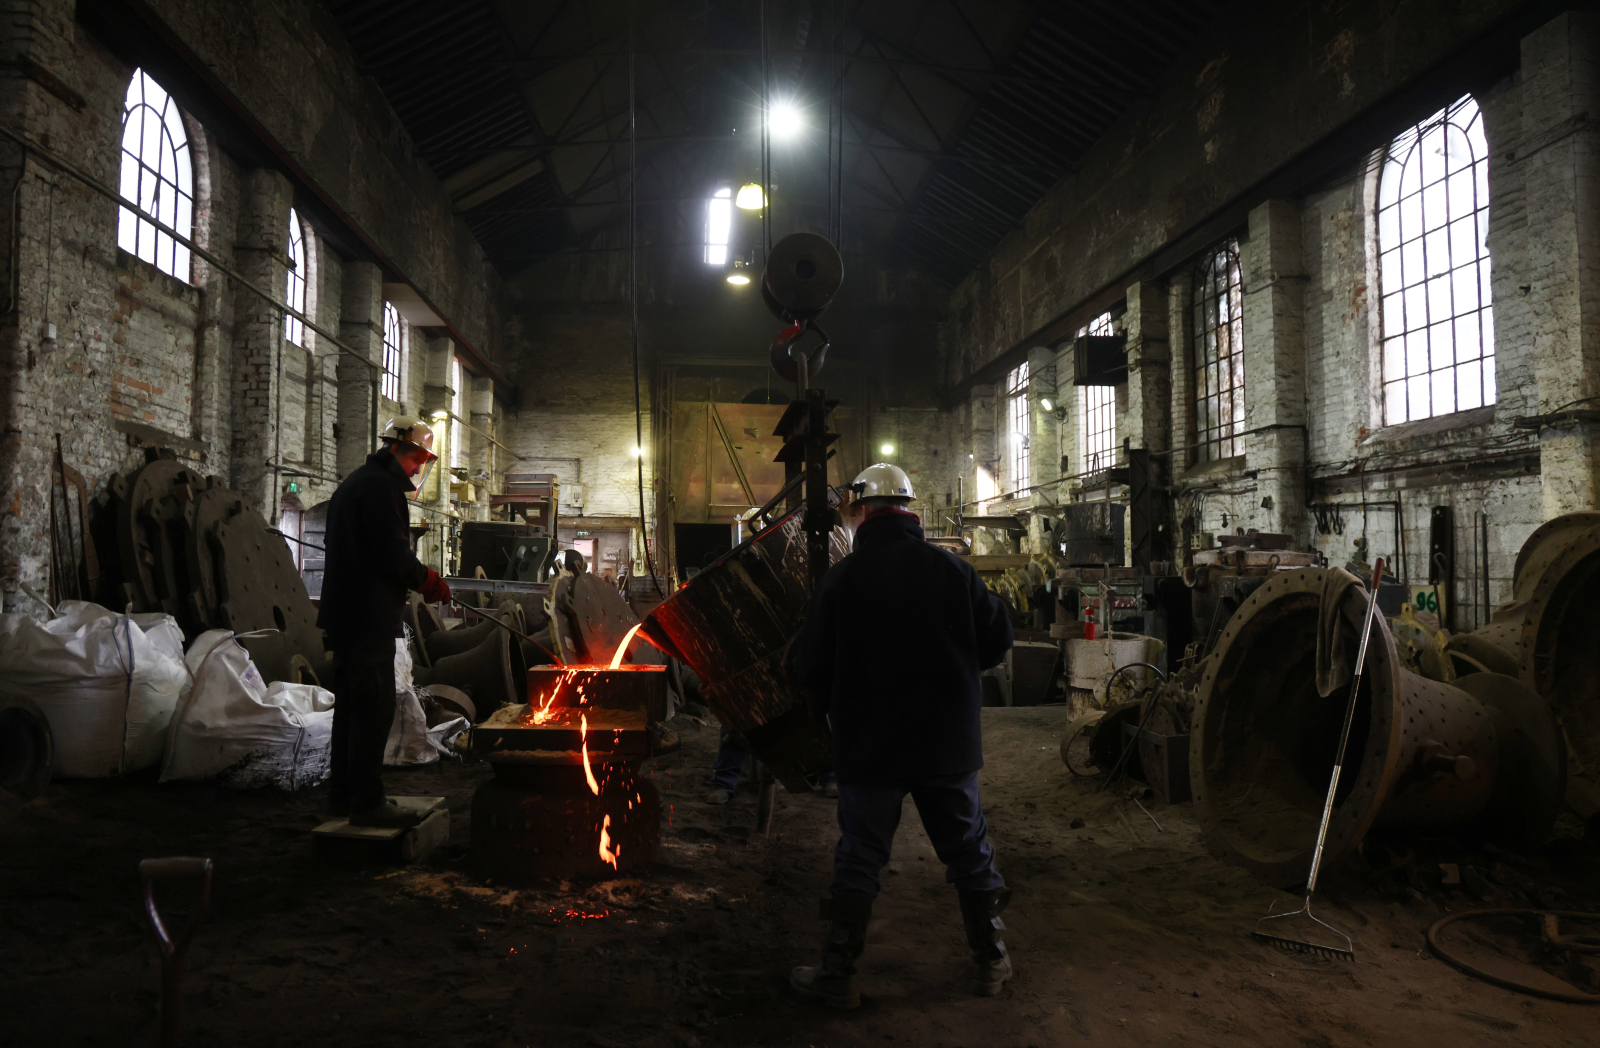 Historic moment as Hope Bell is cast at Loughborough bell foundry